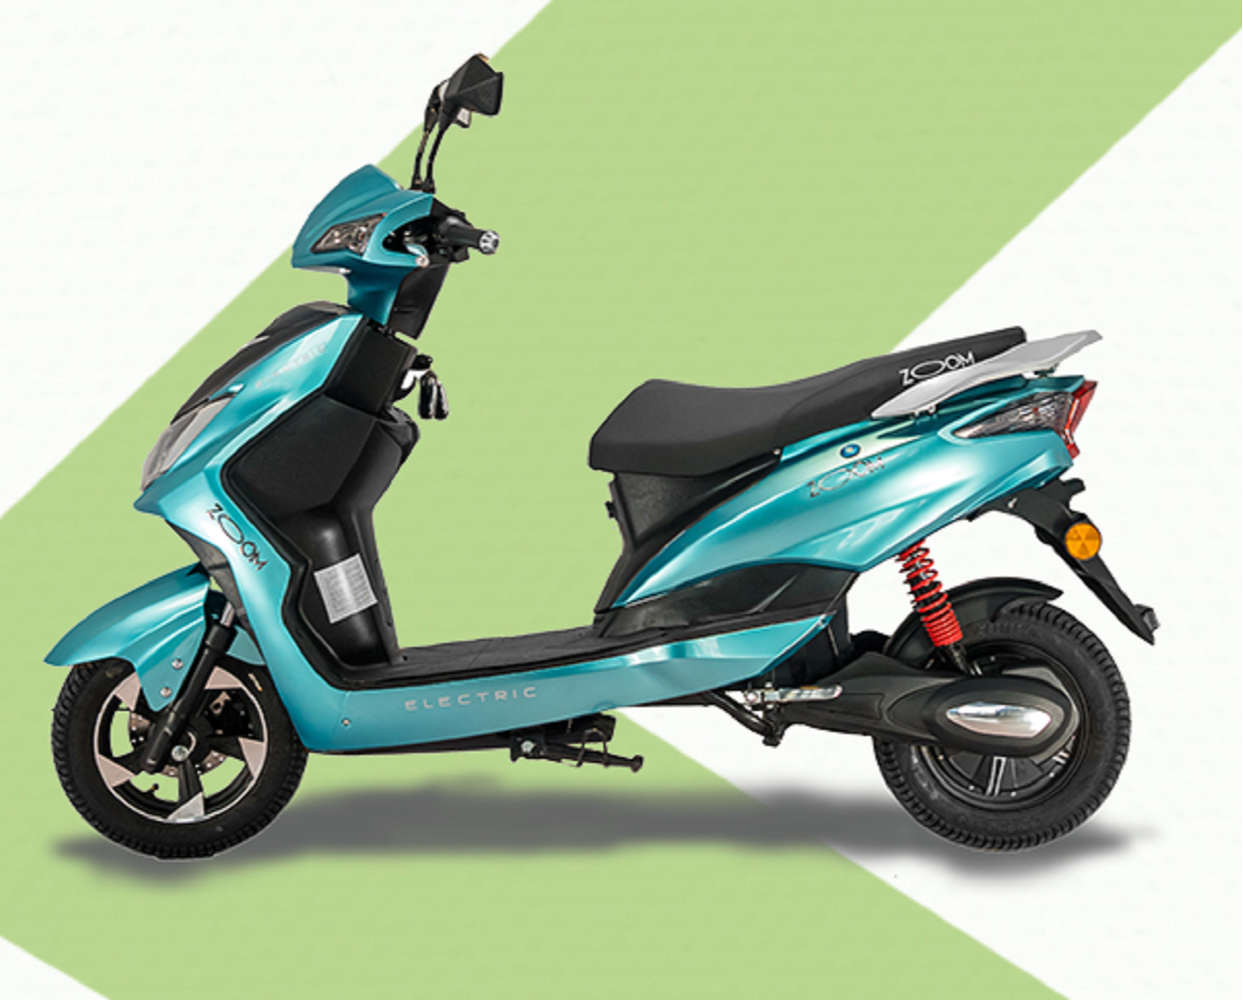 Kinetic Green's New Electric Scooter  Zulu  Features Innovative 'Pay as You Use' Battery Model